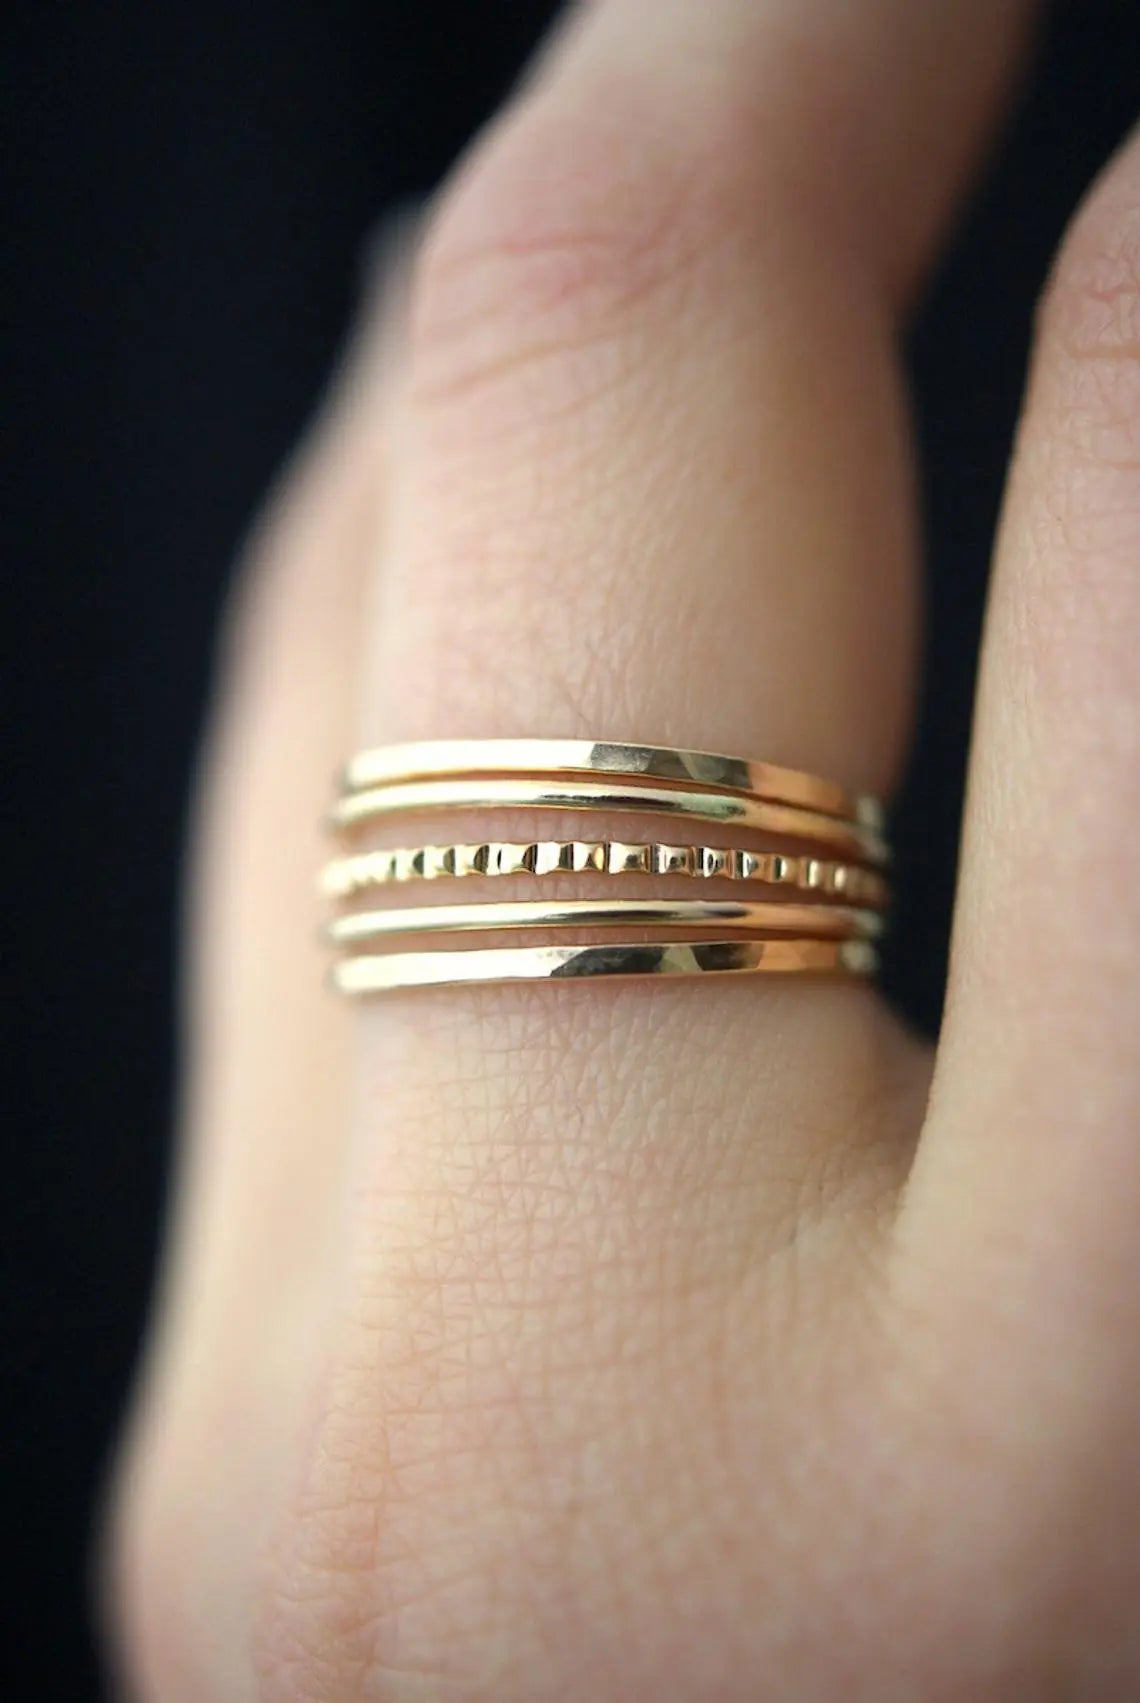 The Classic Lined Set of 5 Stacking Rings, Gold Fill, Rose Gold Fill or Sterling Silver